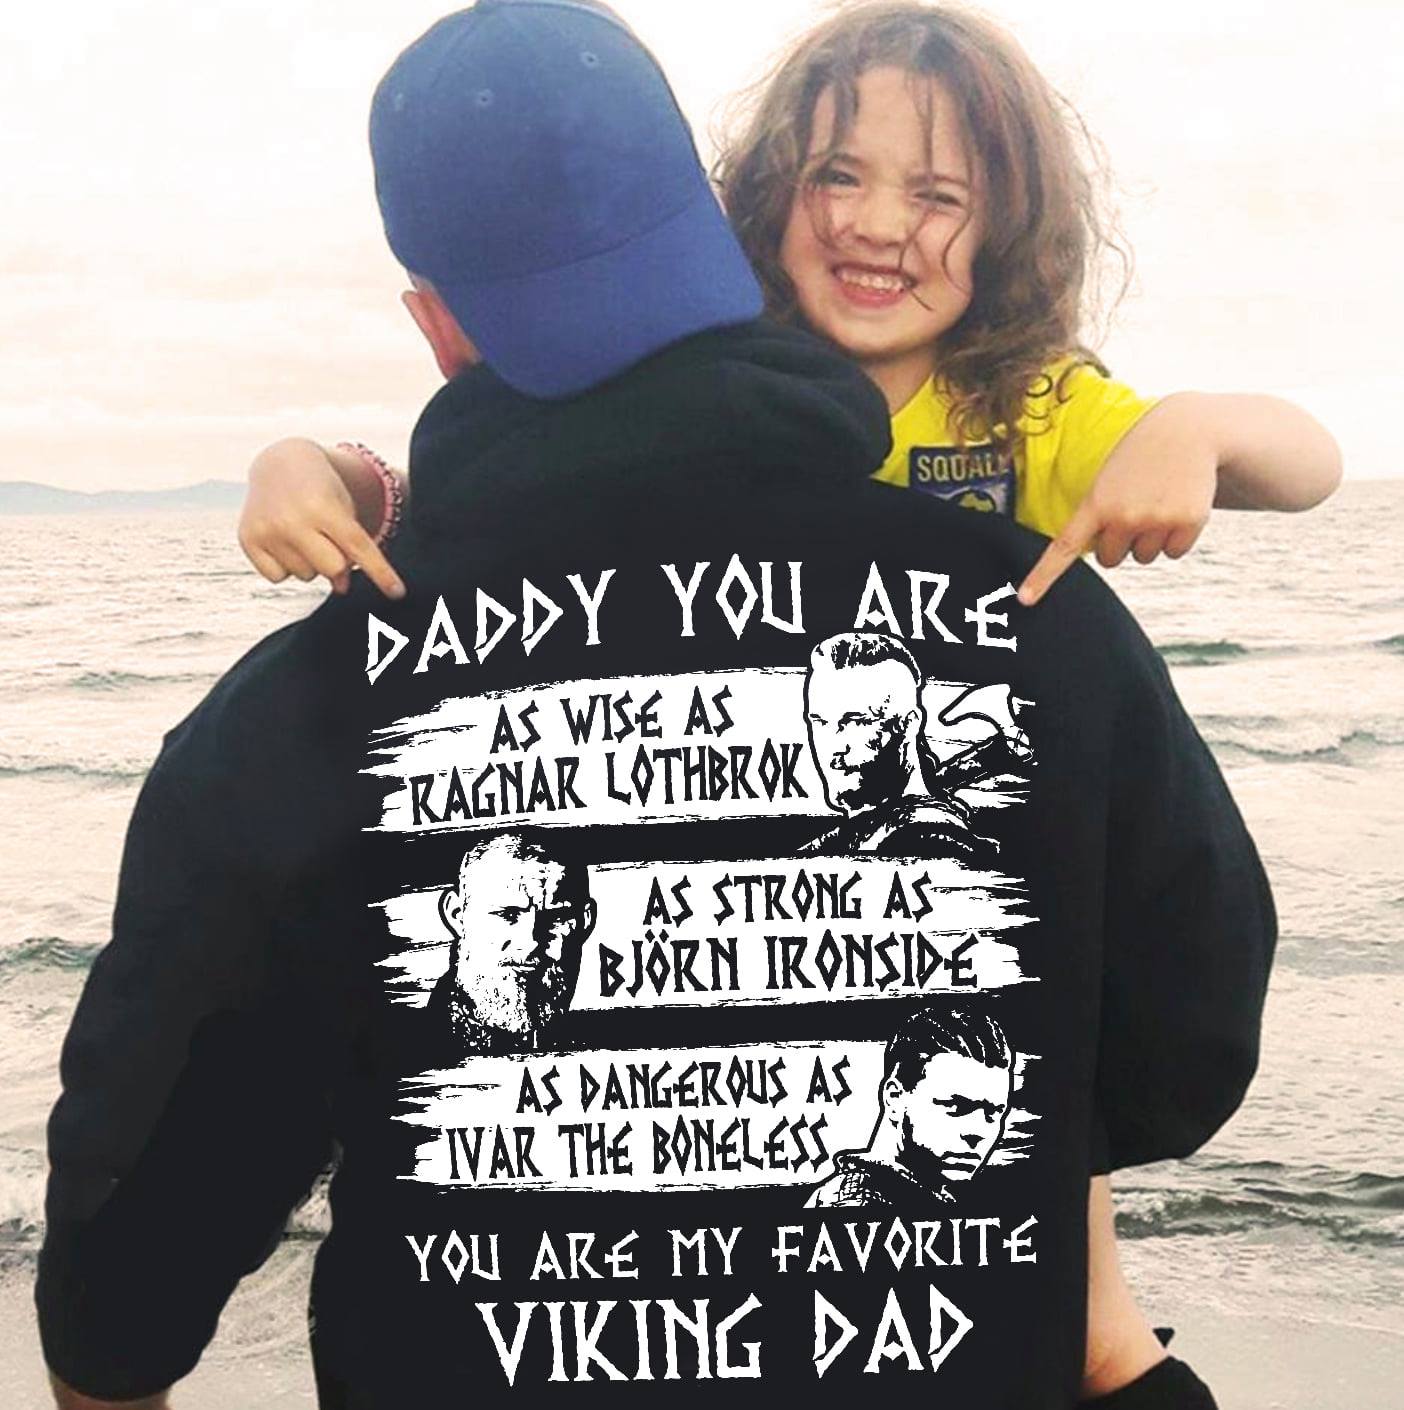 Daddy you are as wise as Ragnar Lothbrok as strong as Bjorn Ironside as dangerous as Ivar the Boneless